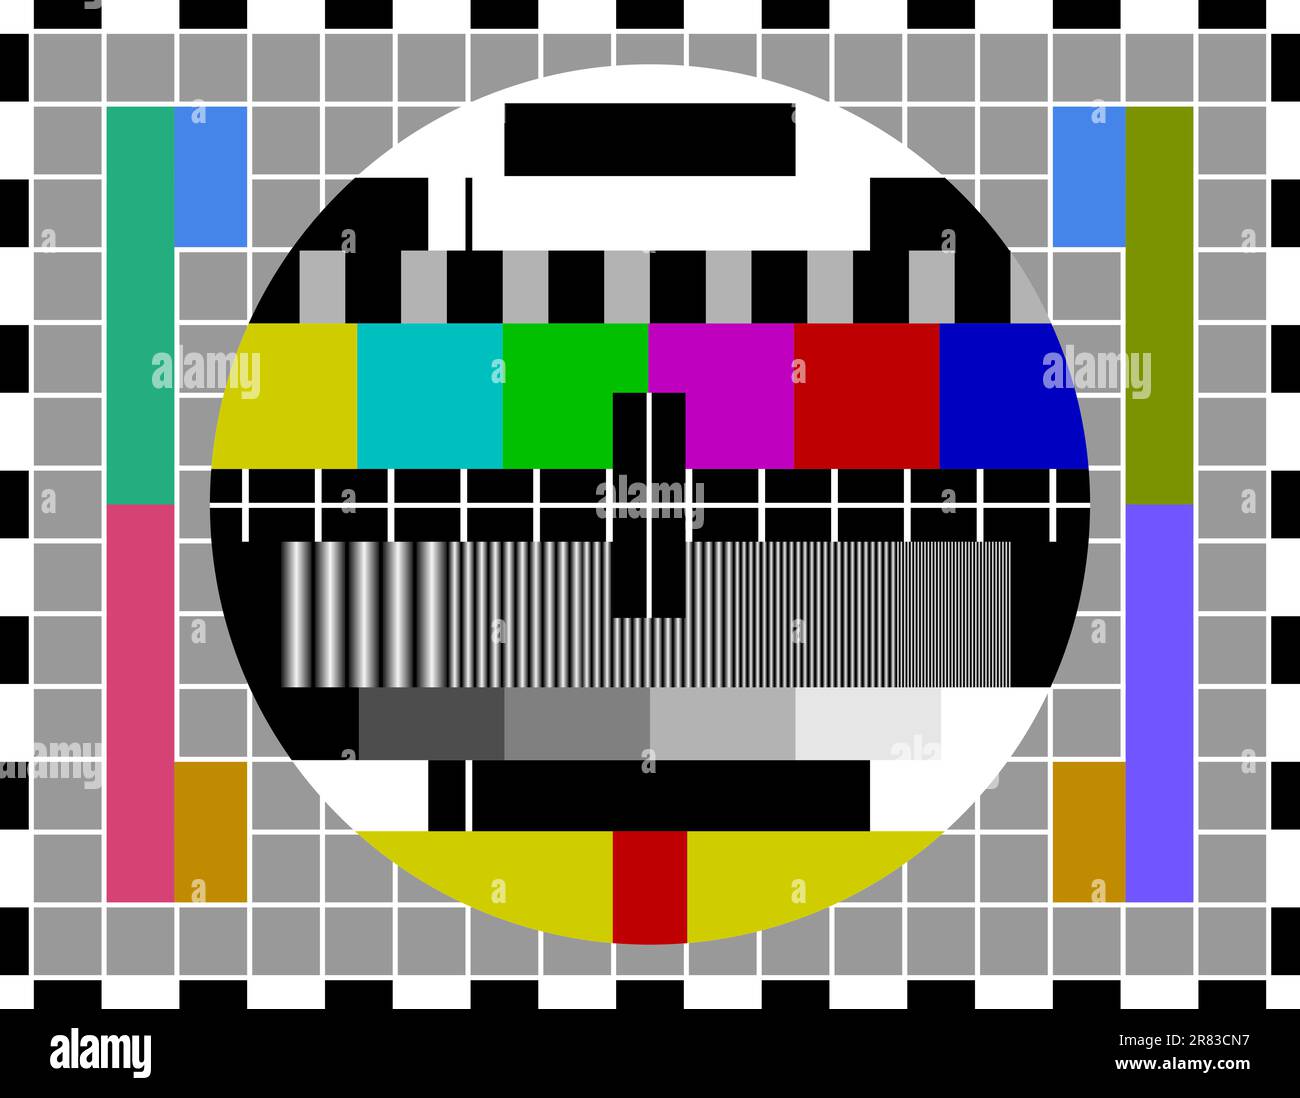 Classic pattern for testing TV signal quality in PAL television systems Stock Vector